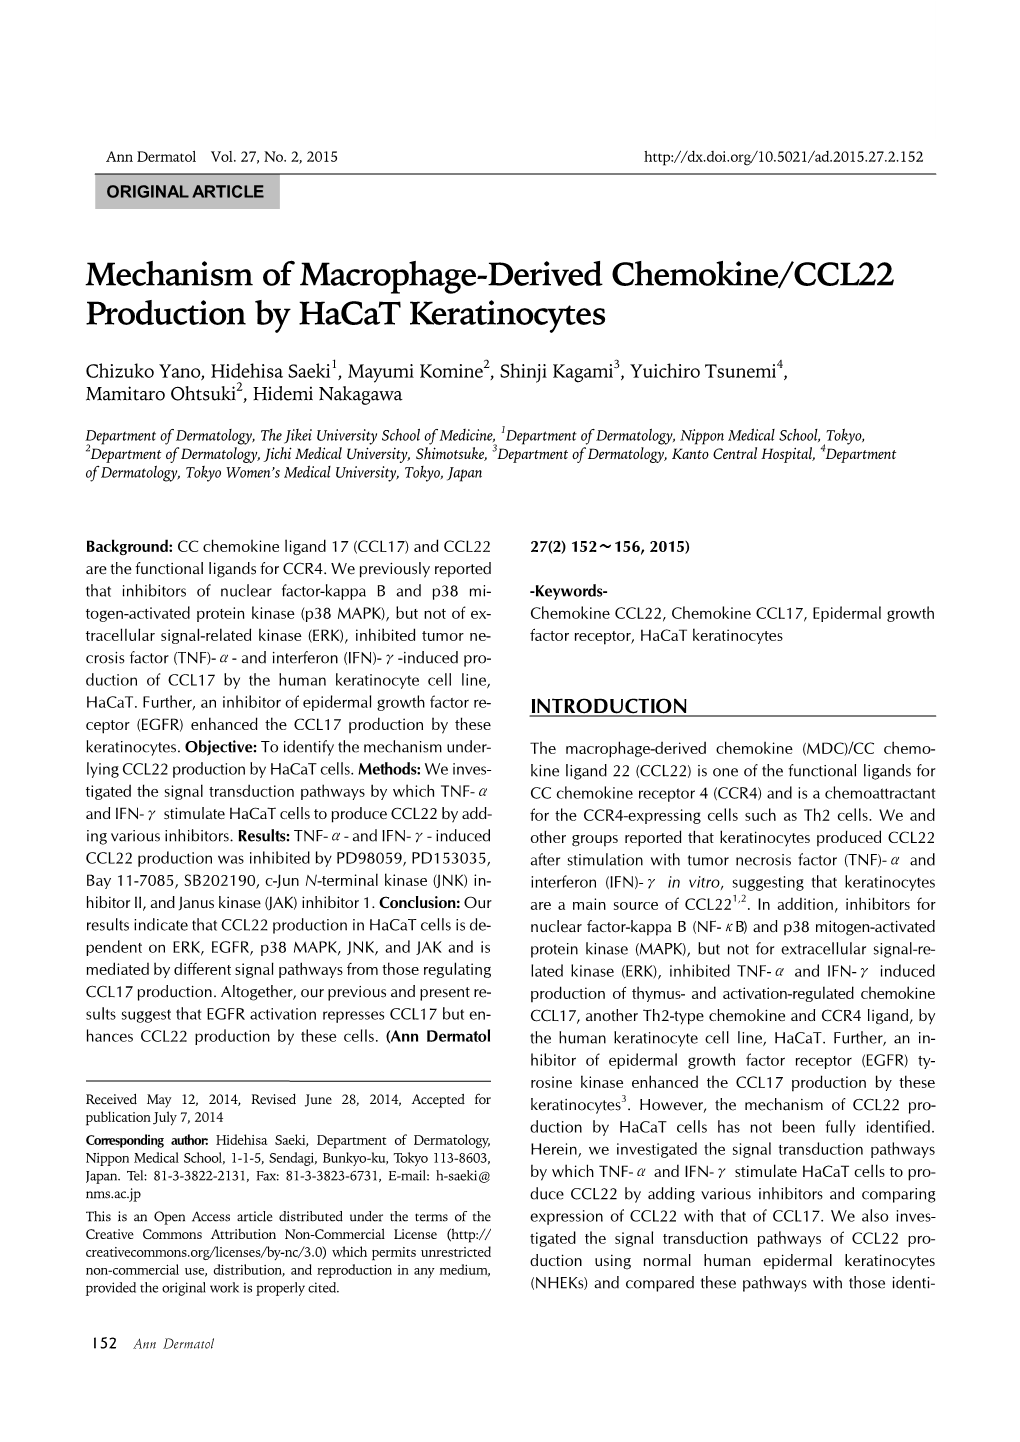 Mechanism of Macrophage-Derived Chemokine/CCL22 Production by Hacat Keratinocytes